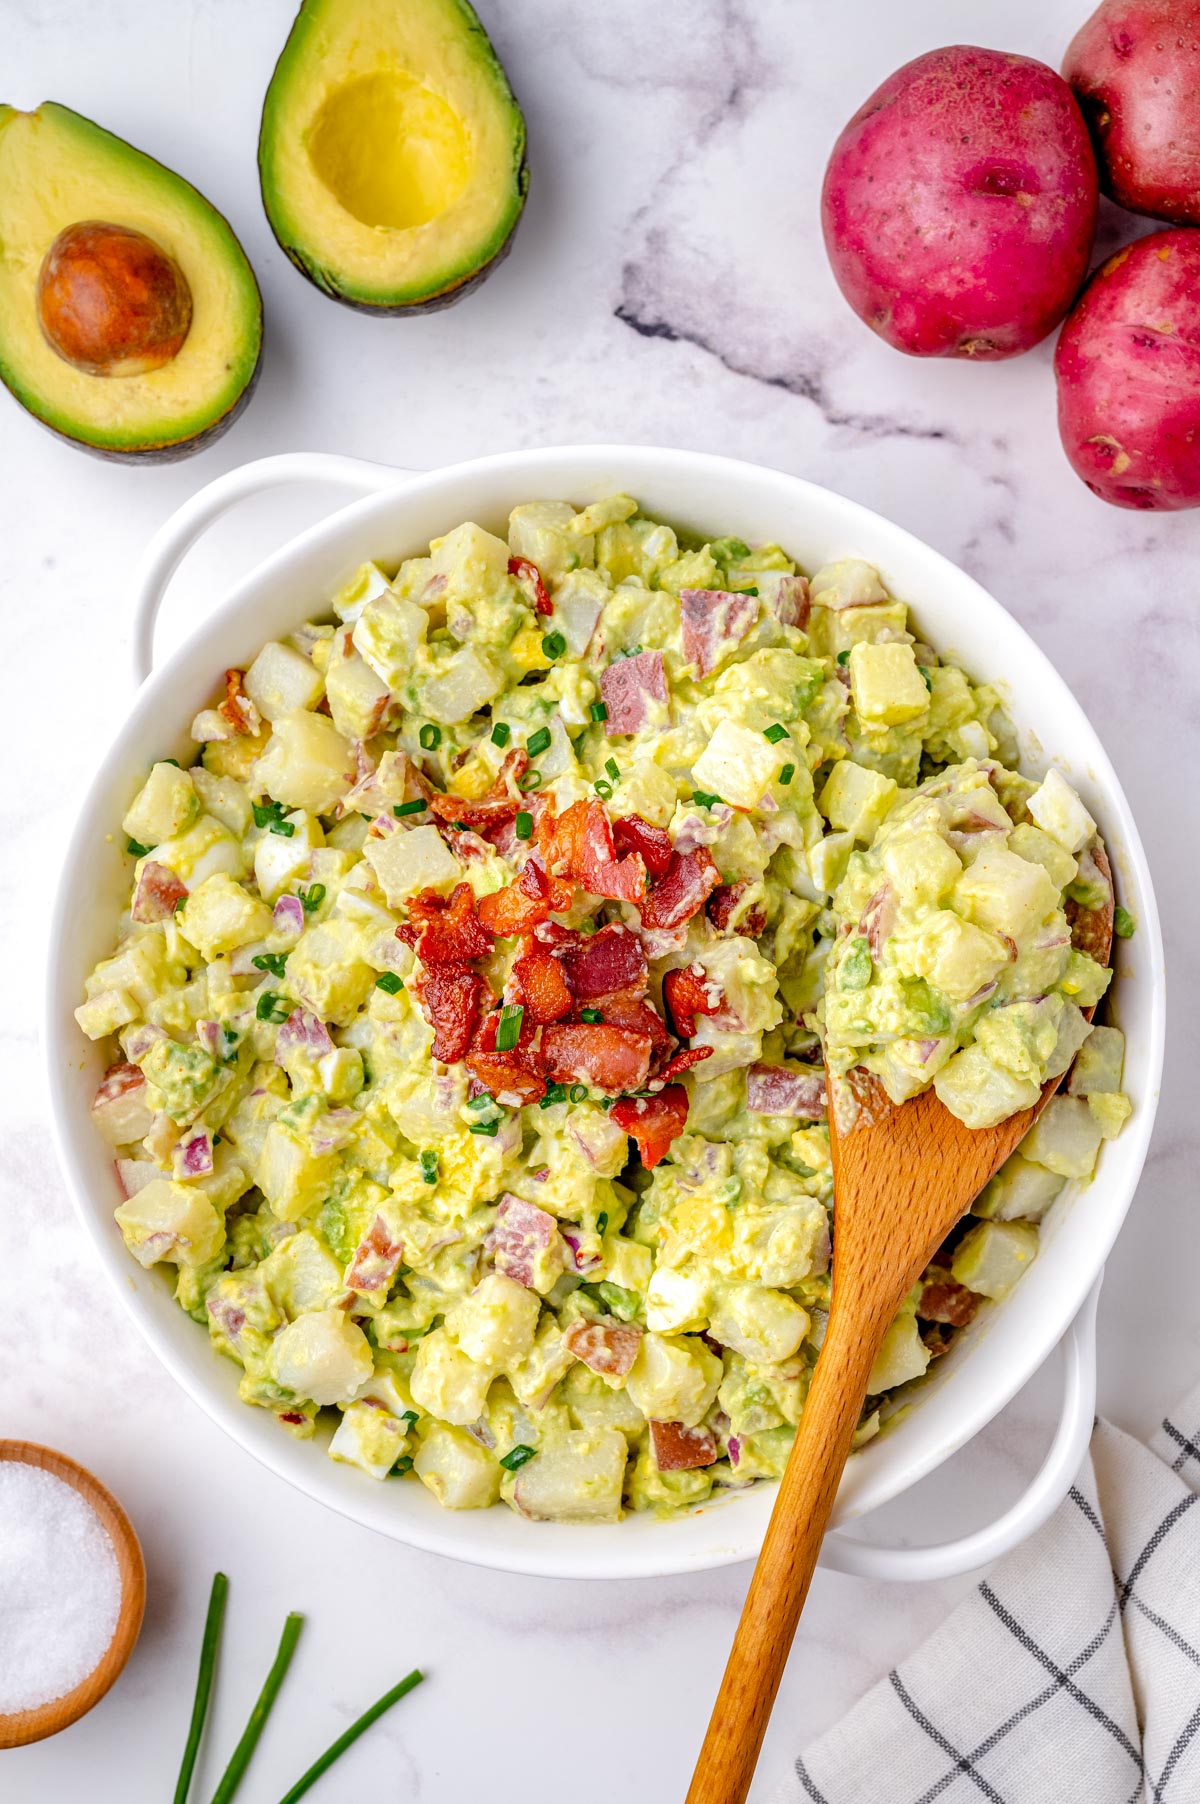 An overhead picture of the finished Avocado Potato Salad with a wooden spoon picking up some of the potato salad.